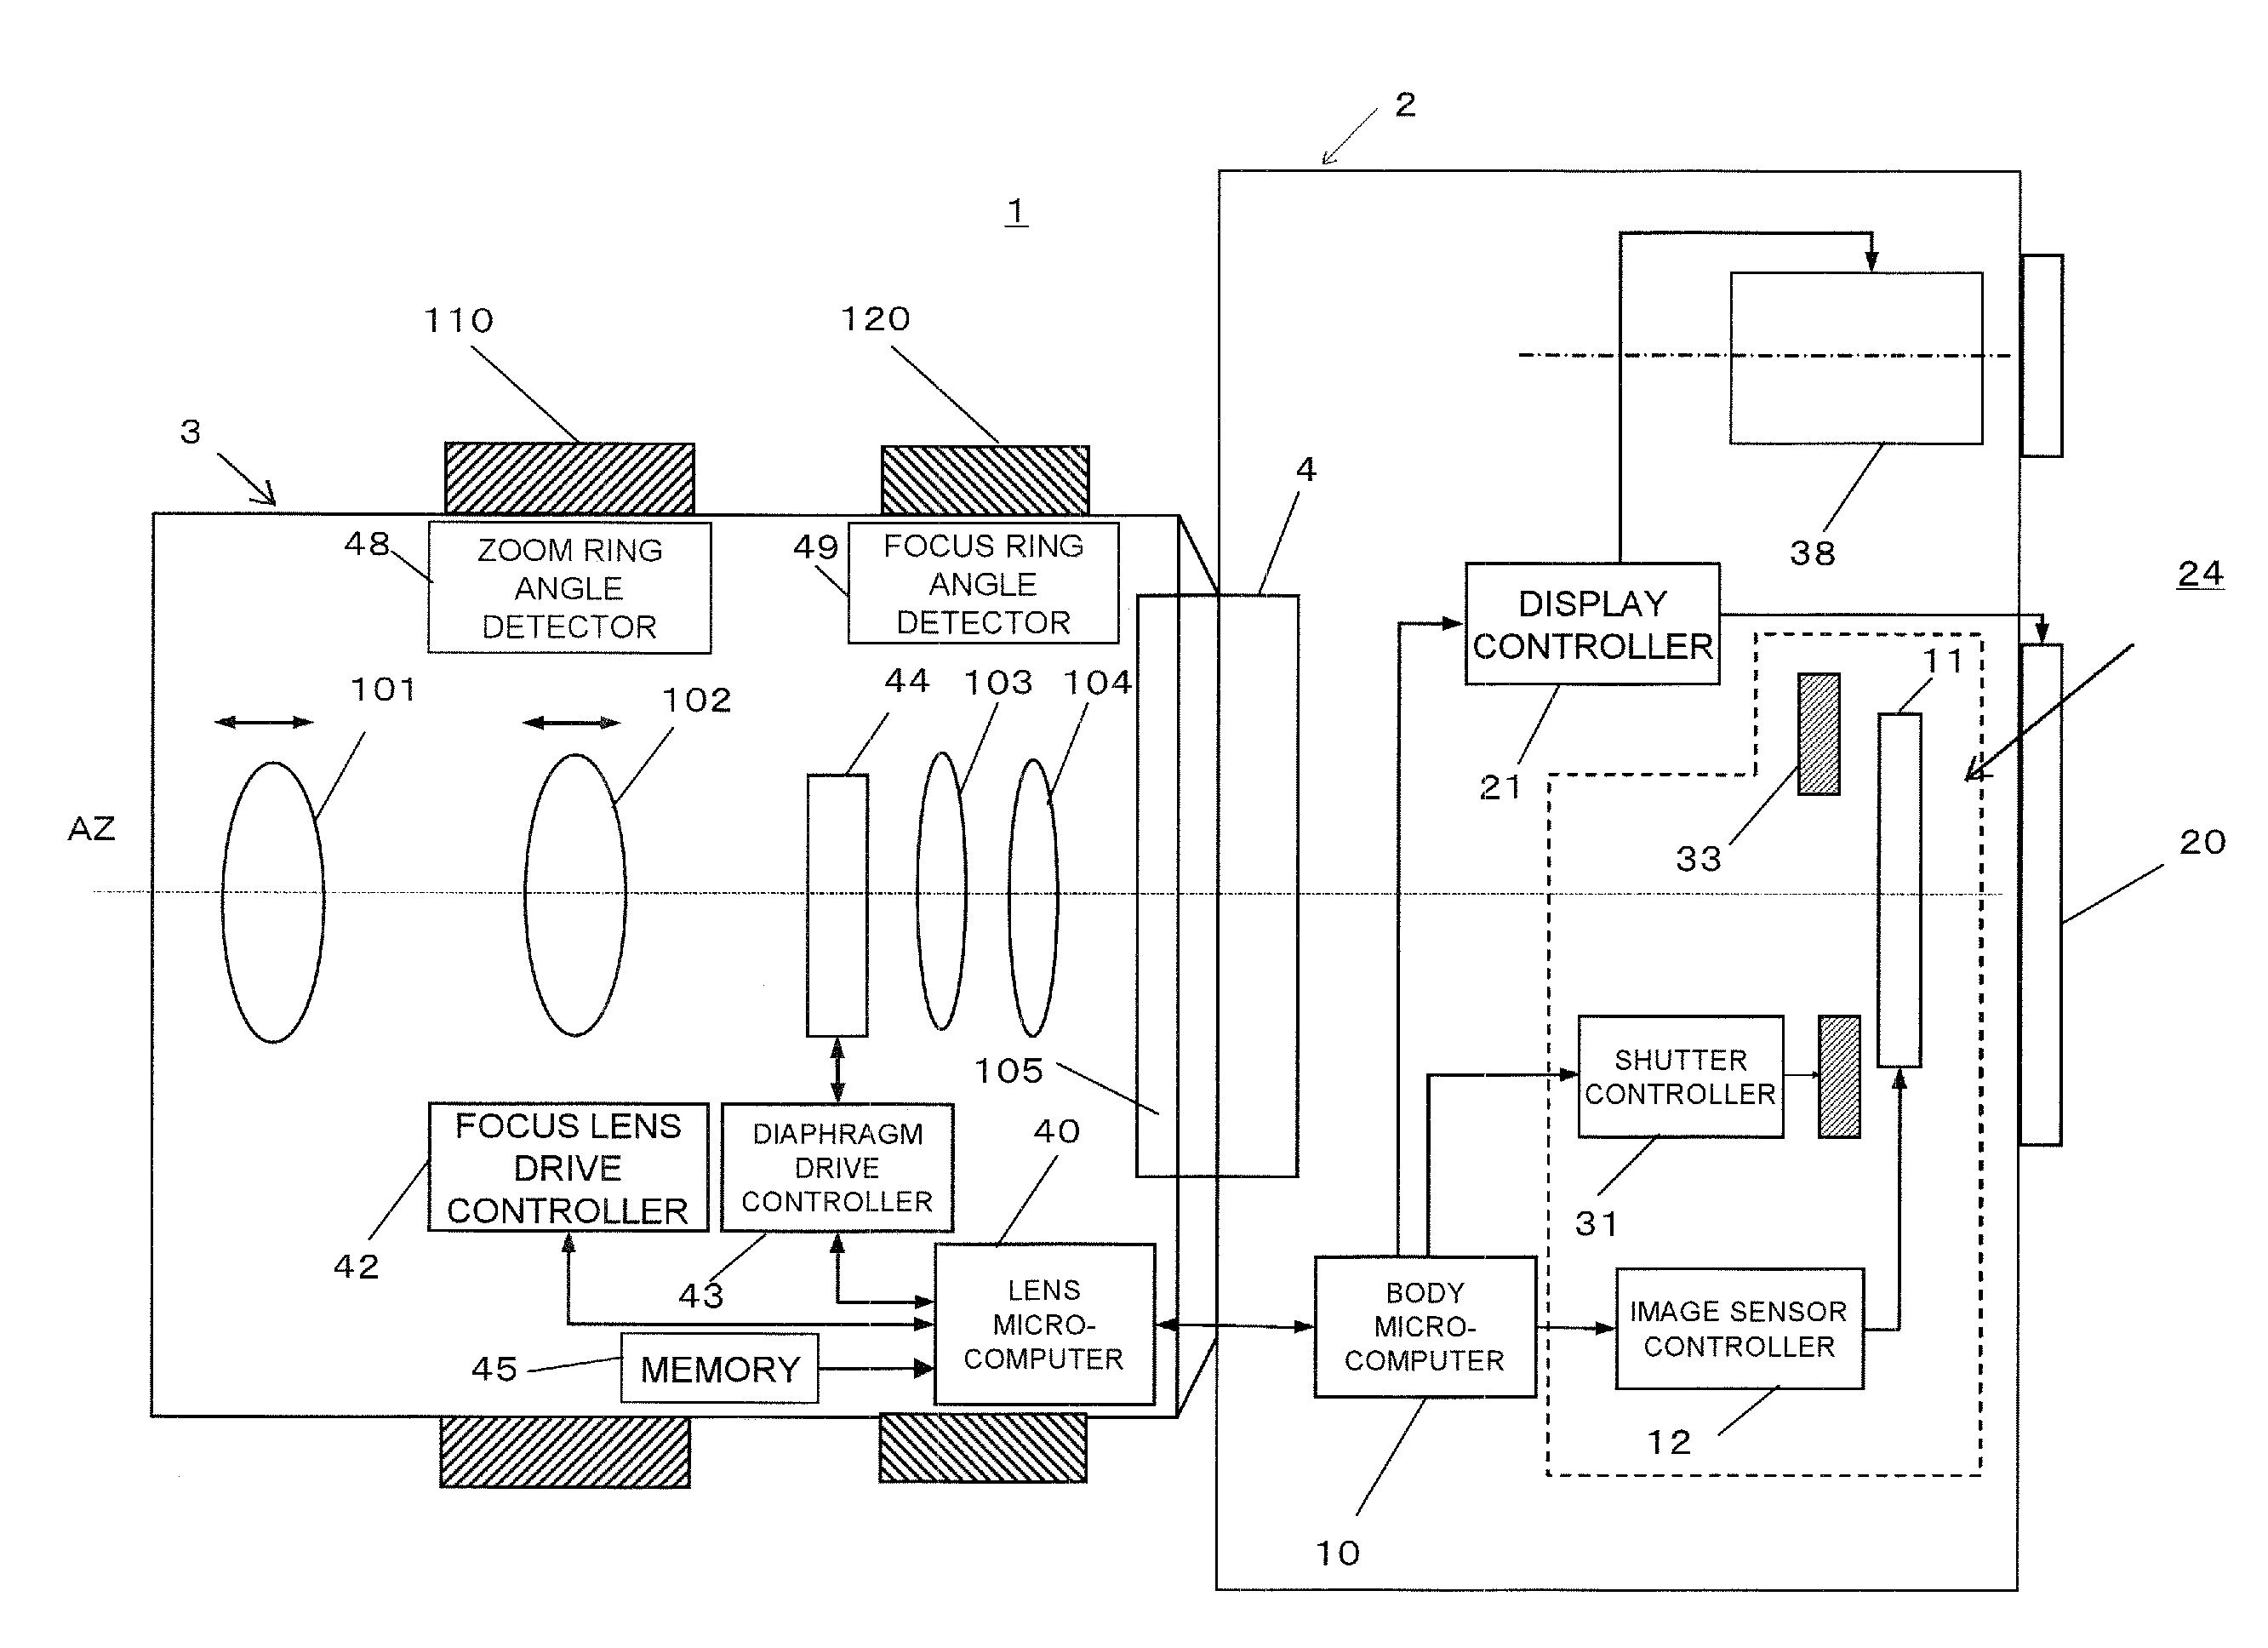 Zoom lens and imaging apparatus including focus cam for converting rotation amounts into focus lens group movement